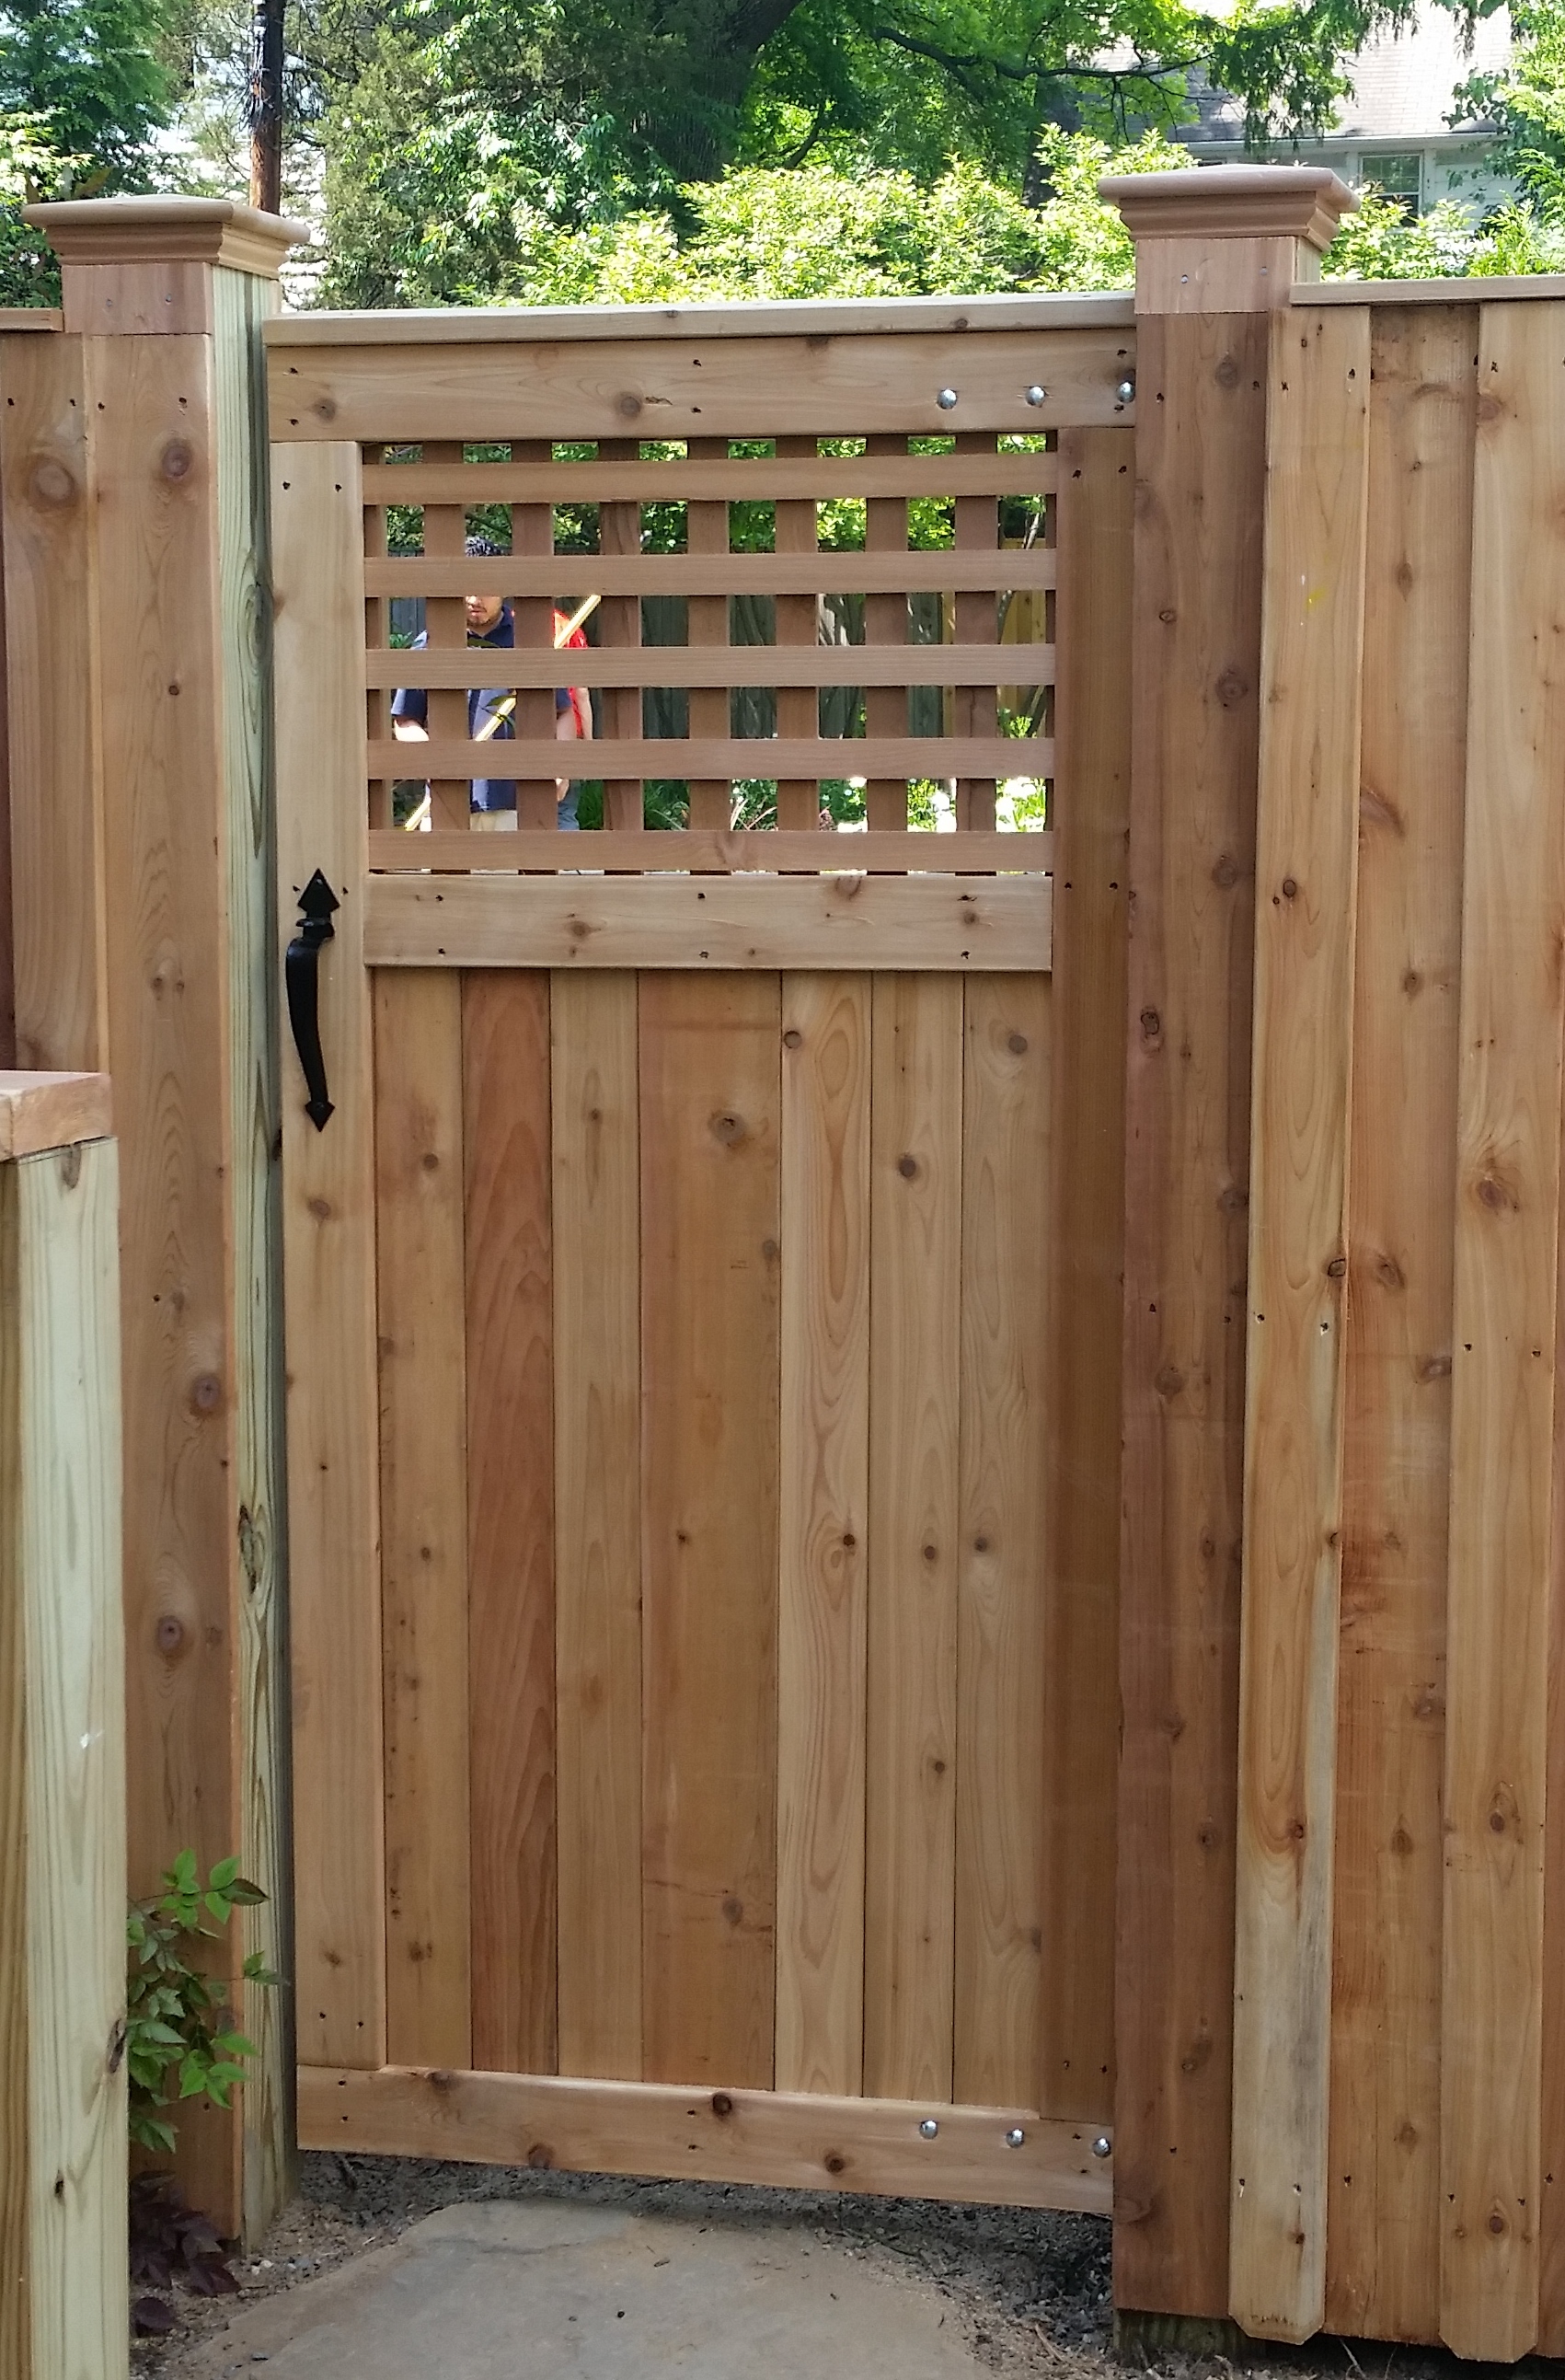 A Custom Gate with A Square Lattice "Peek a Boo" Section 